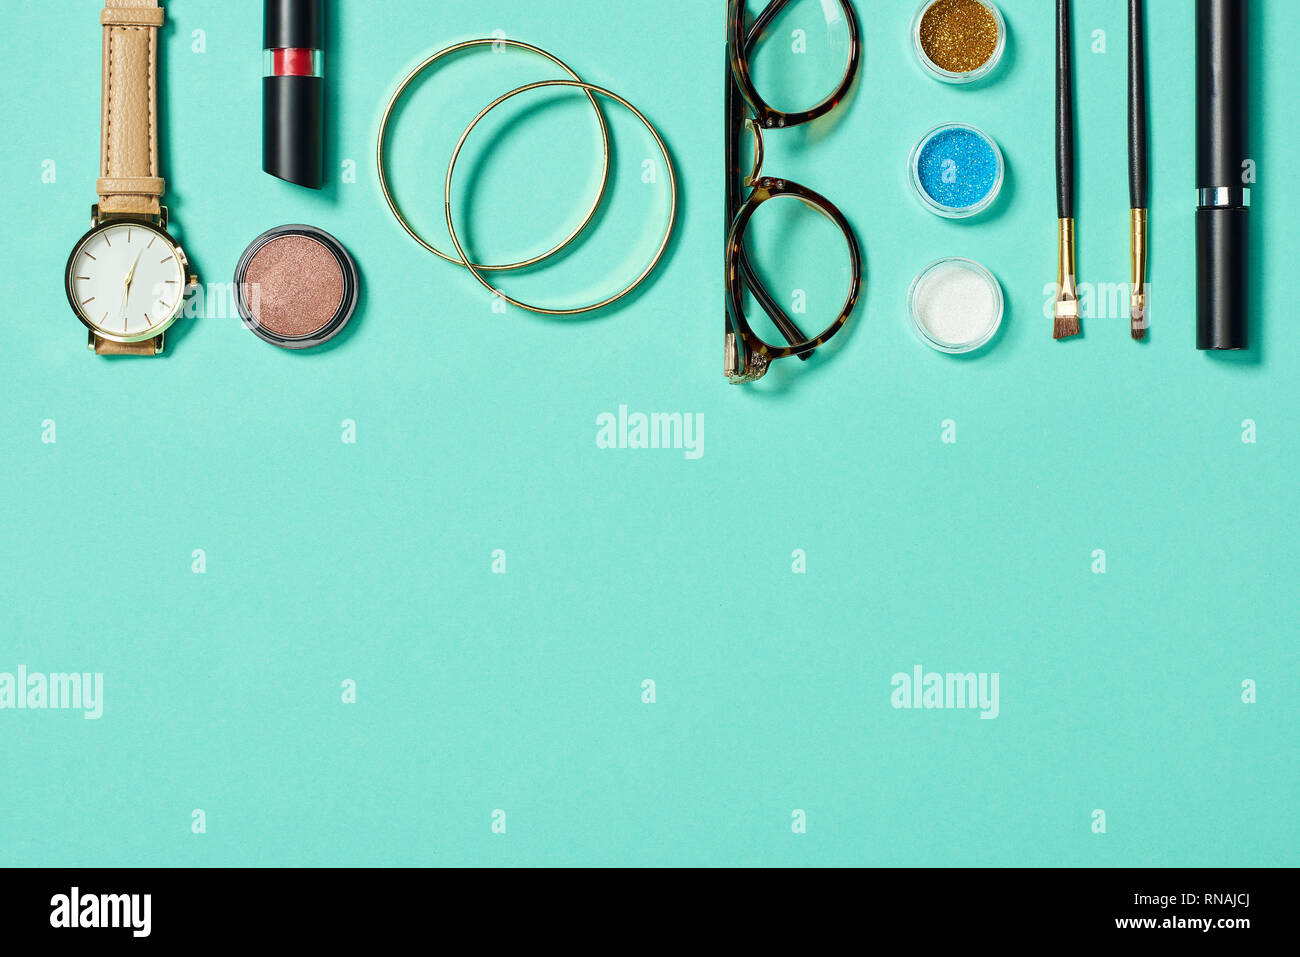 Top view of watch, lipstick, bracelets, glasses, eyeshadow, blush, cosmetic brushes and mascara on turquoise background Stock Photo